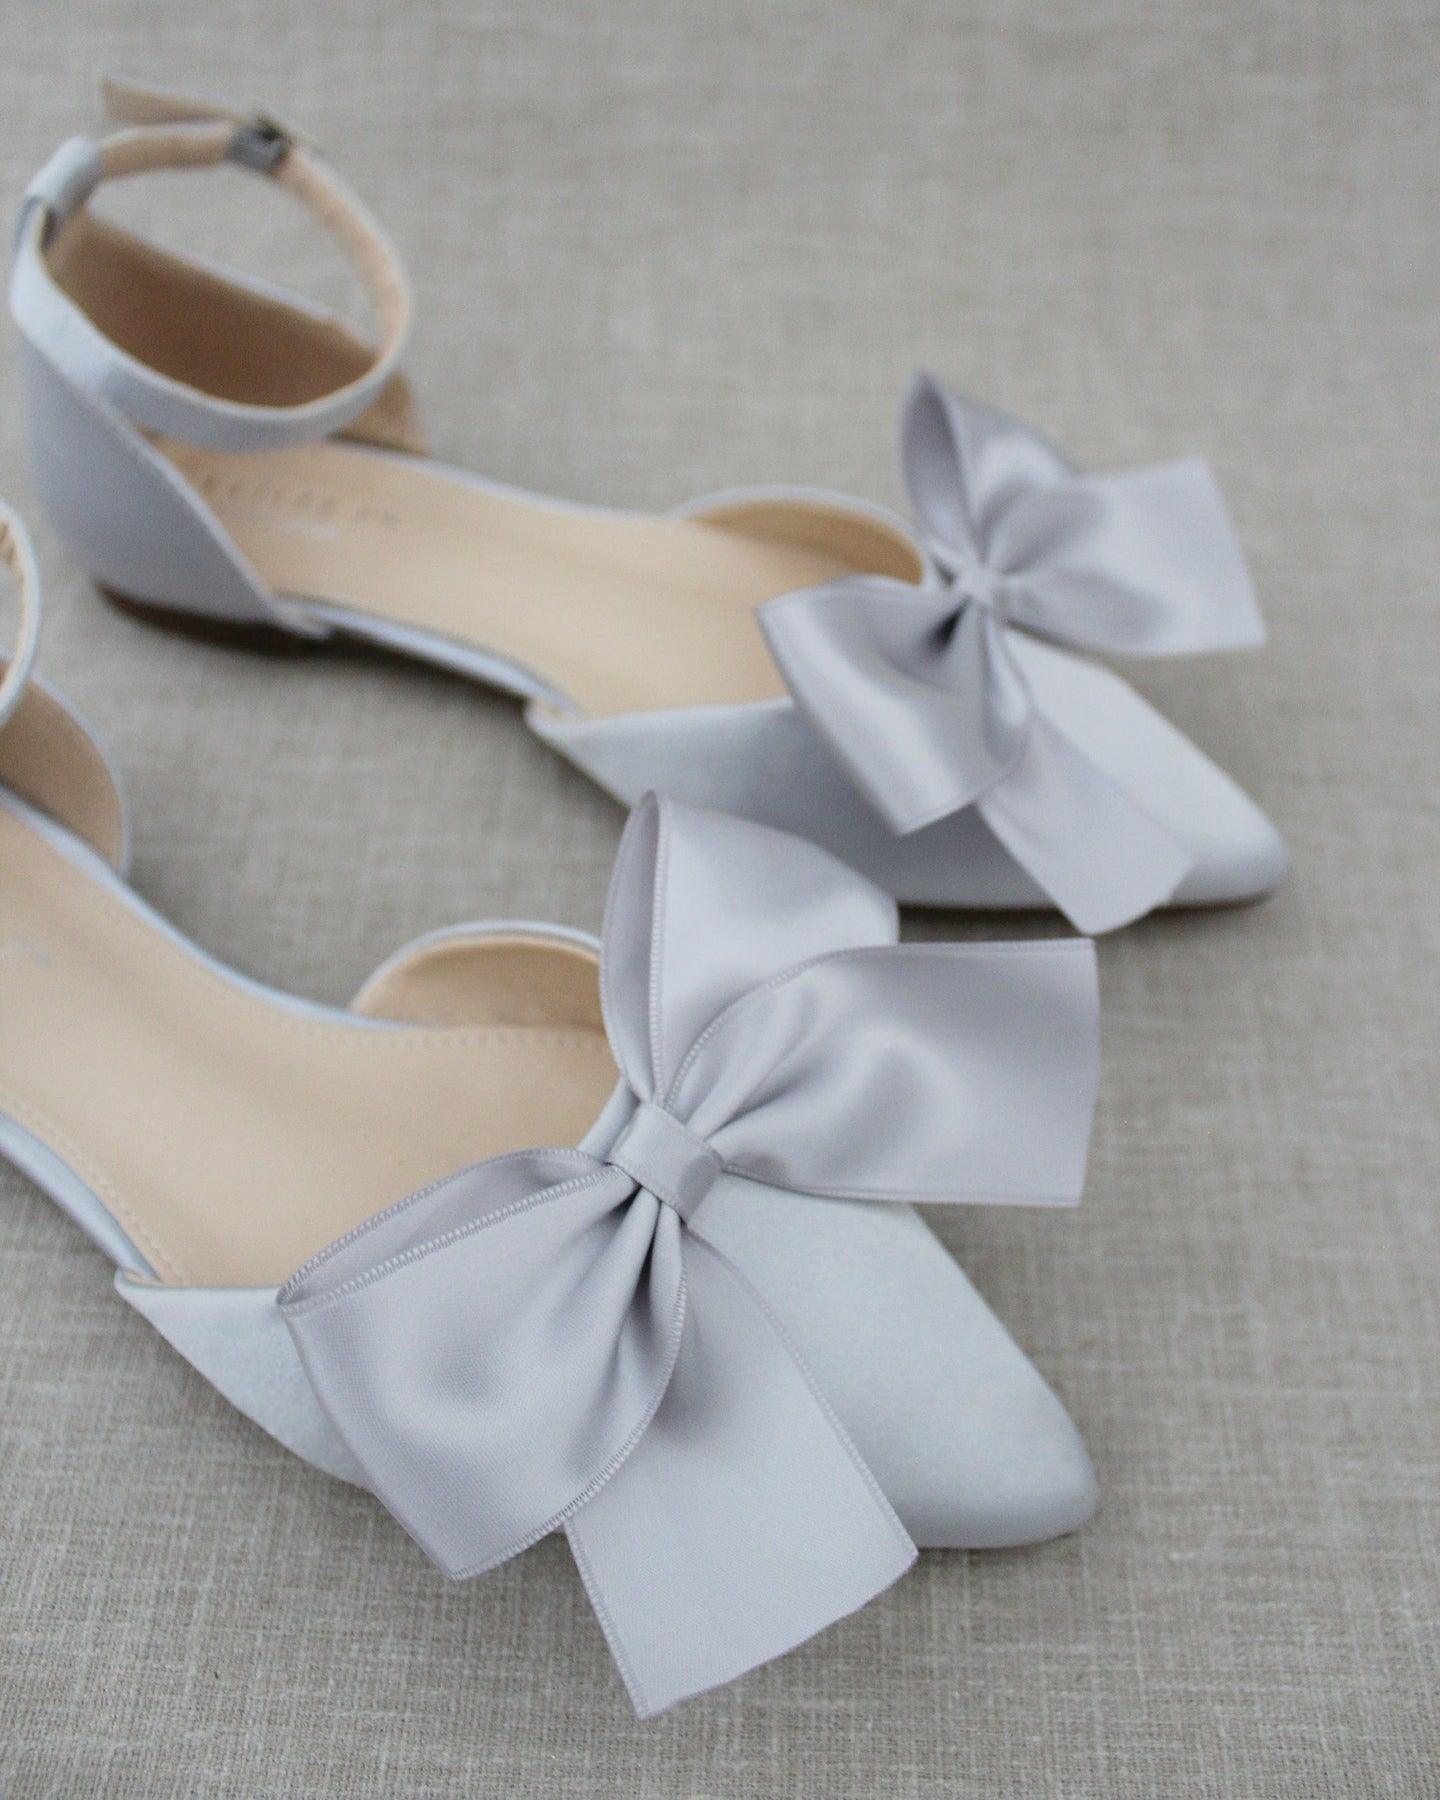 Silver Satin Pointy Toe flats with Front Satin Bow - Women Shoes ...